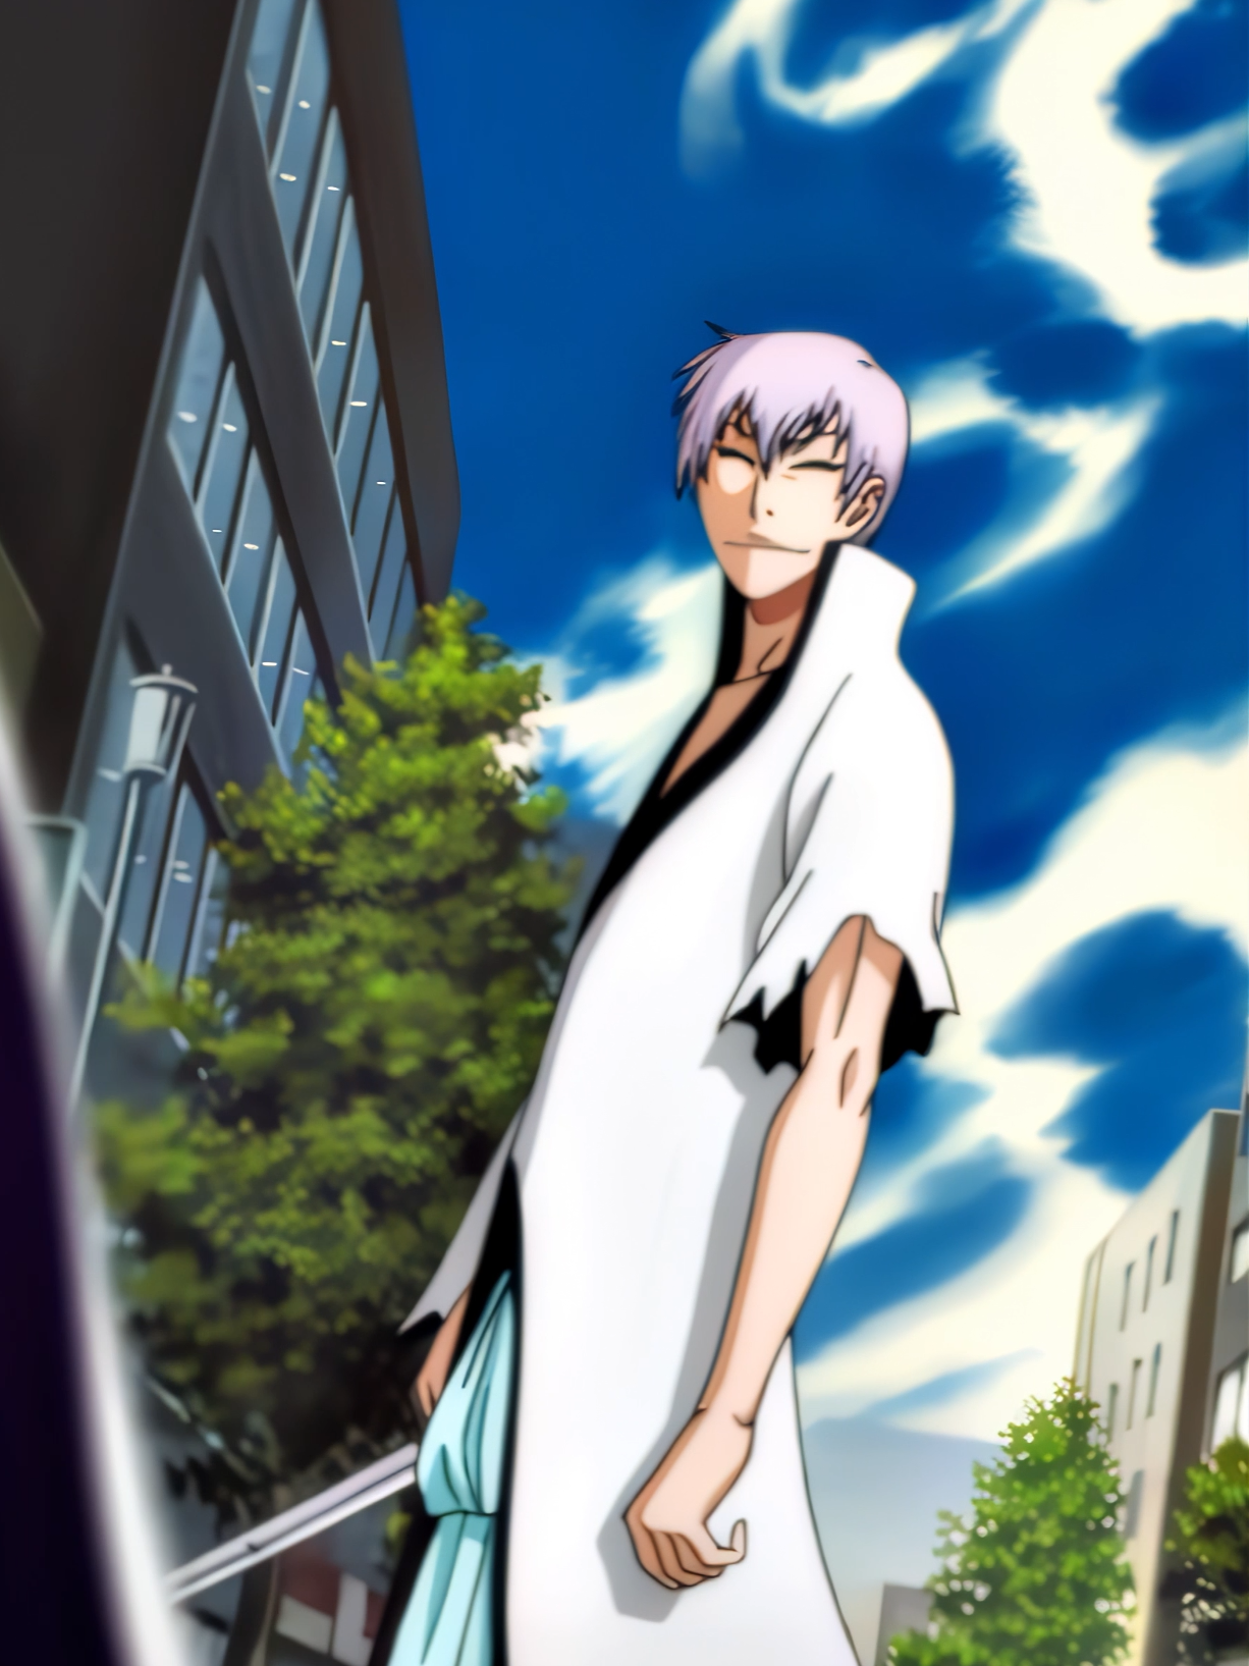 The only one who land a clean hit on AIZEN #anime #bleach #gin